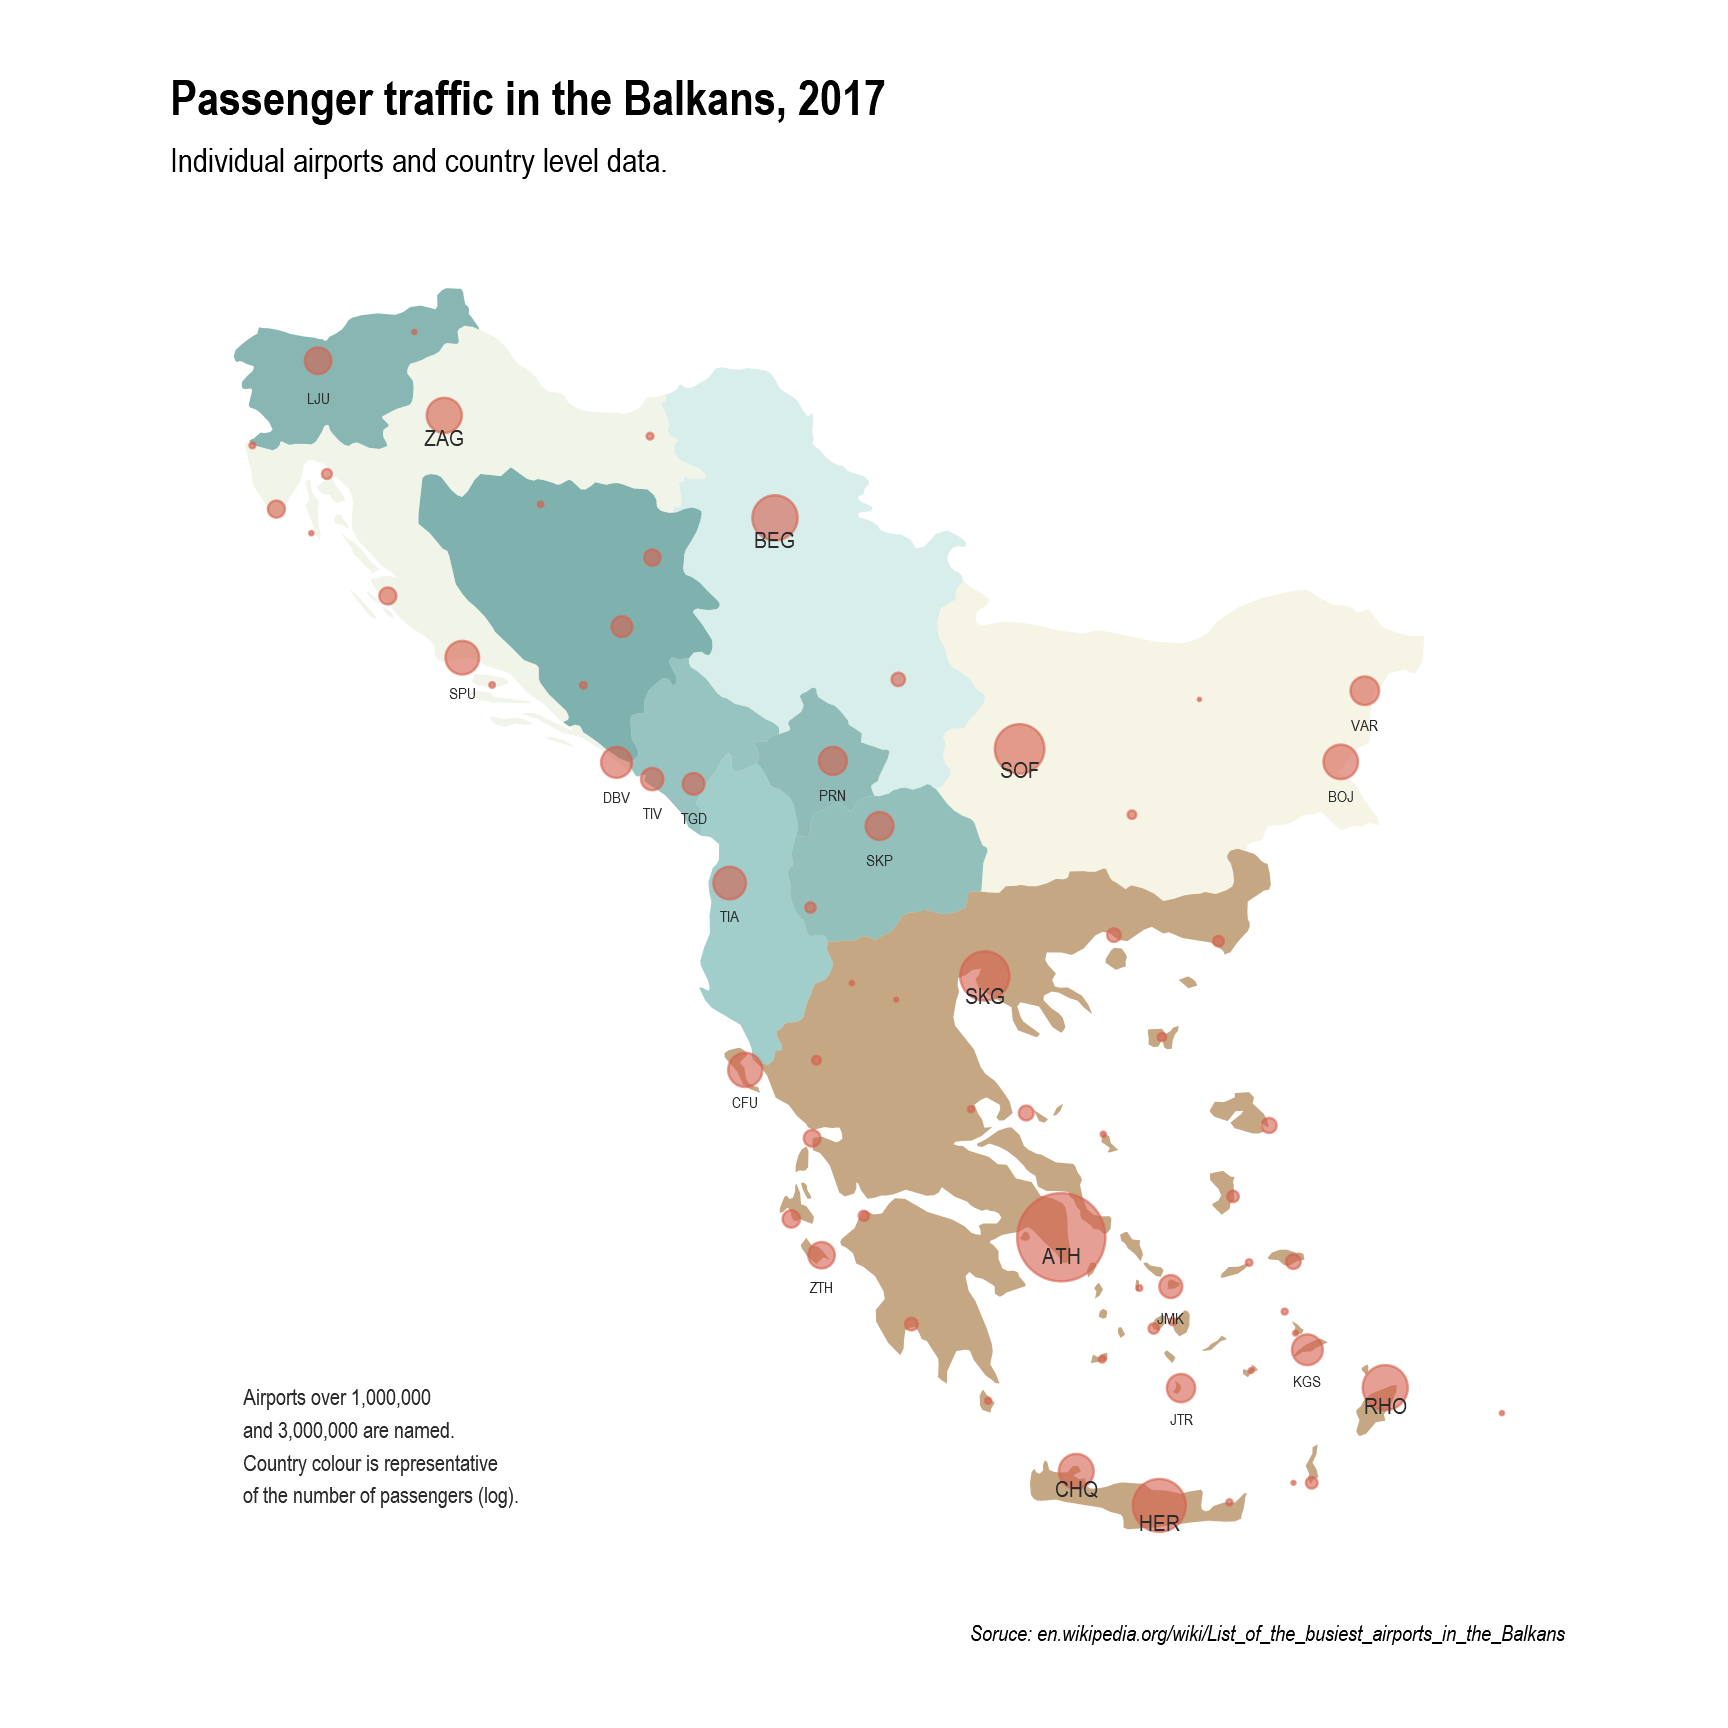 Map of Balkans and airports relative to their size. By far most traffic is in Greece, followed by Bulgaria and Croatia, and 8 airports have more than 3 million passengers.